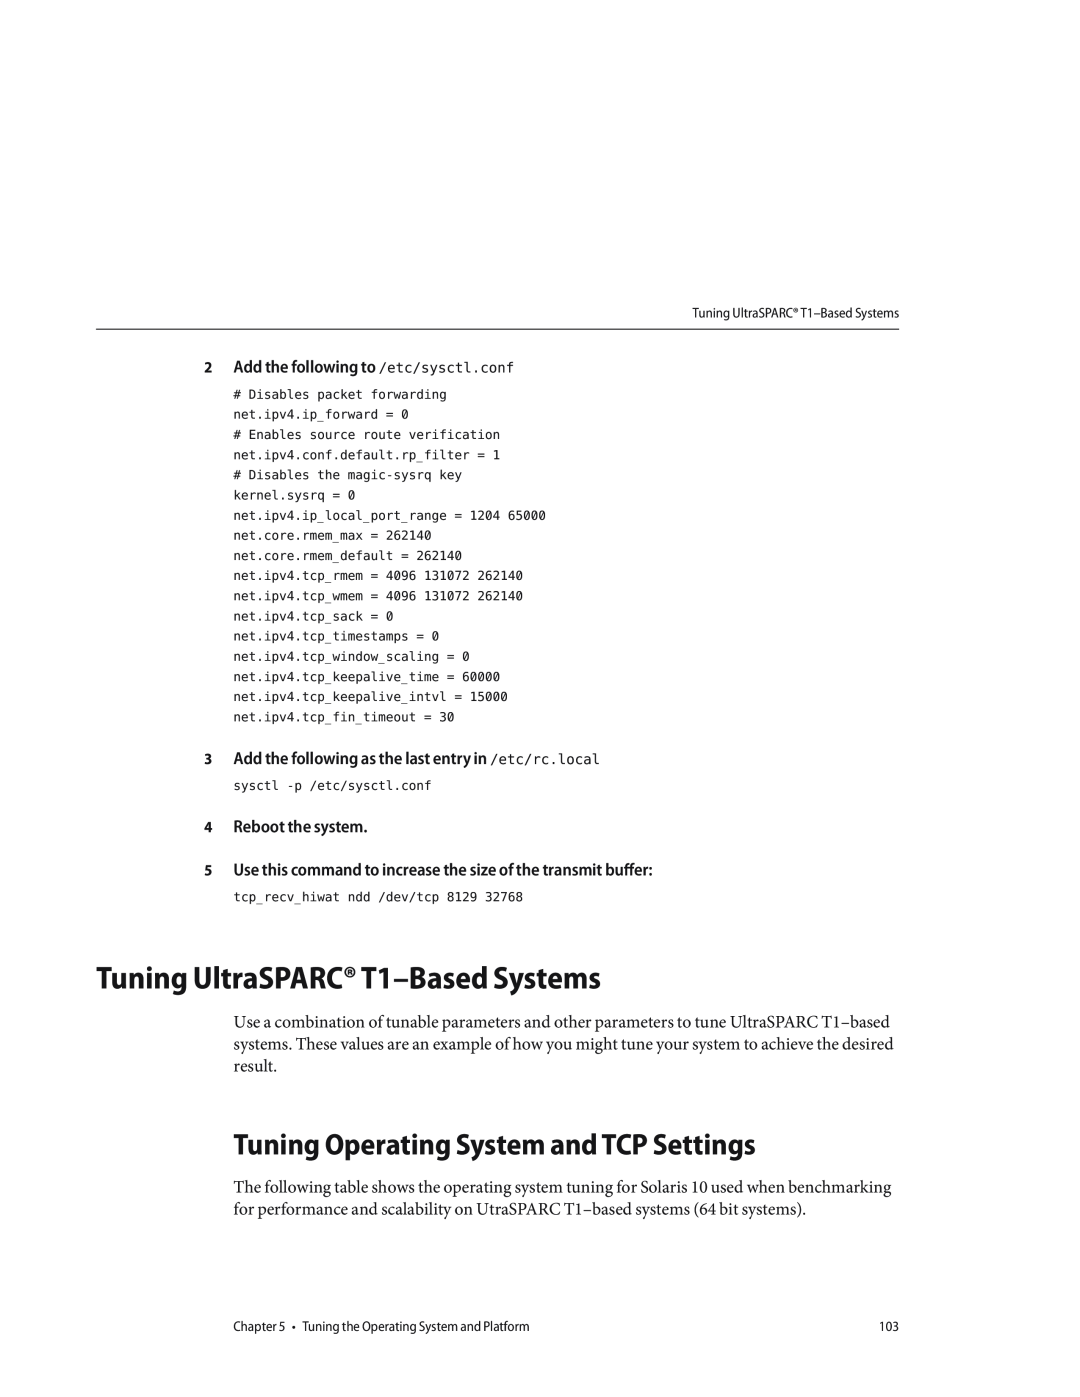 Sun Microsystems 820434310 Tuning UltraSPARC T1-Based Systems, Tuning Operating System and TCP Settings, Reboot the system 